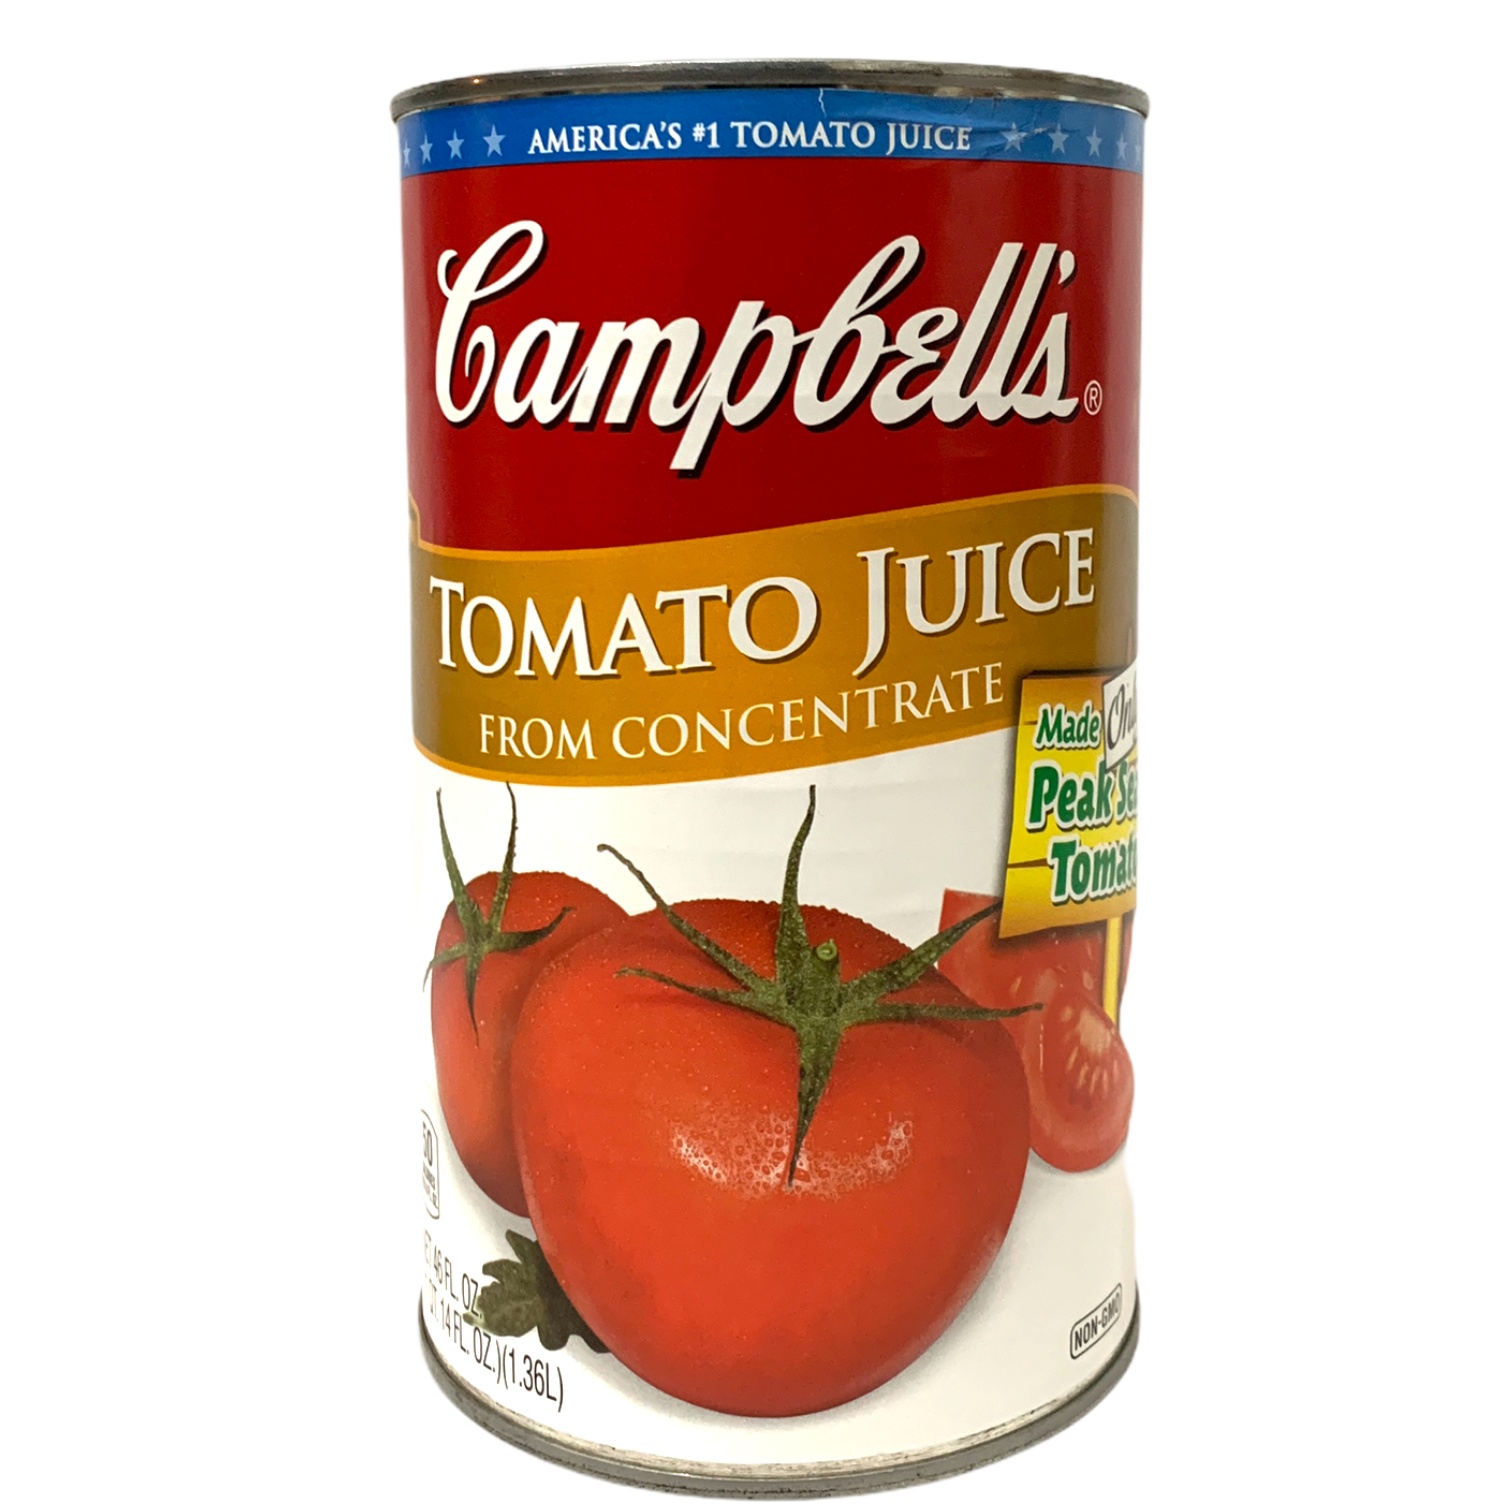 Campbell's Tomato Juice 1.36L sold by American Grocer in the UK